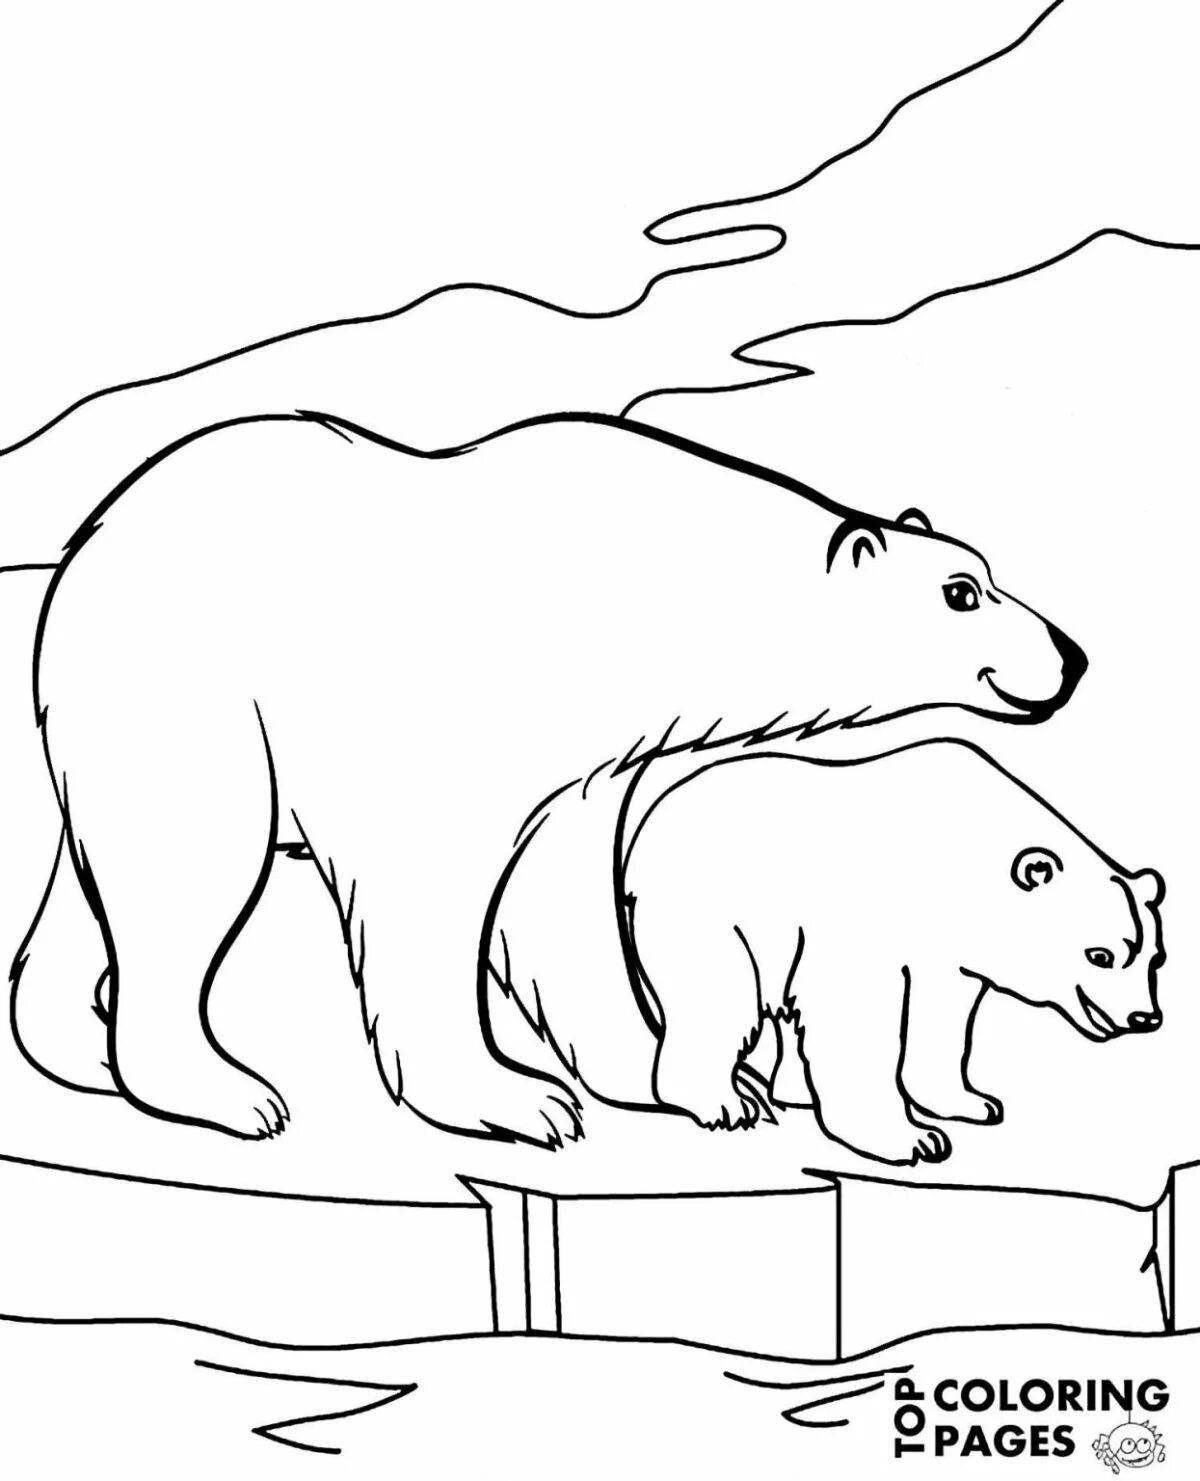 Fancy bear in the north coloring page